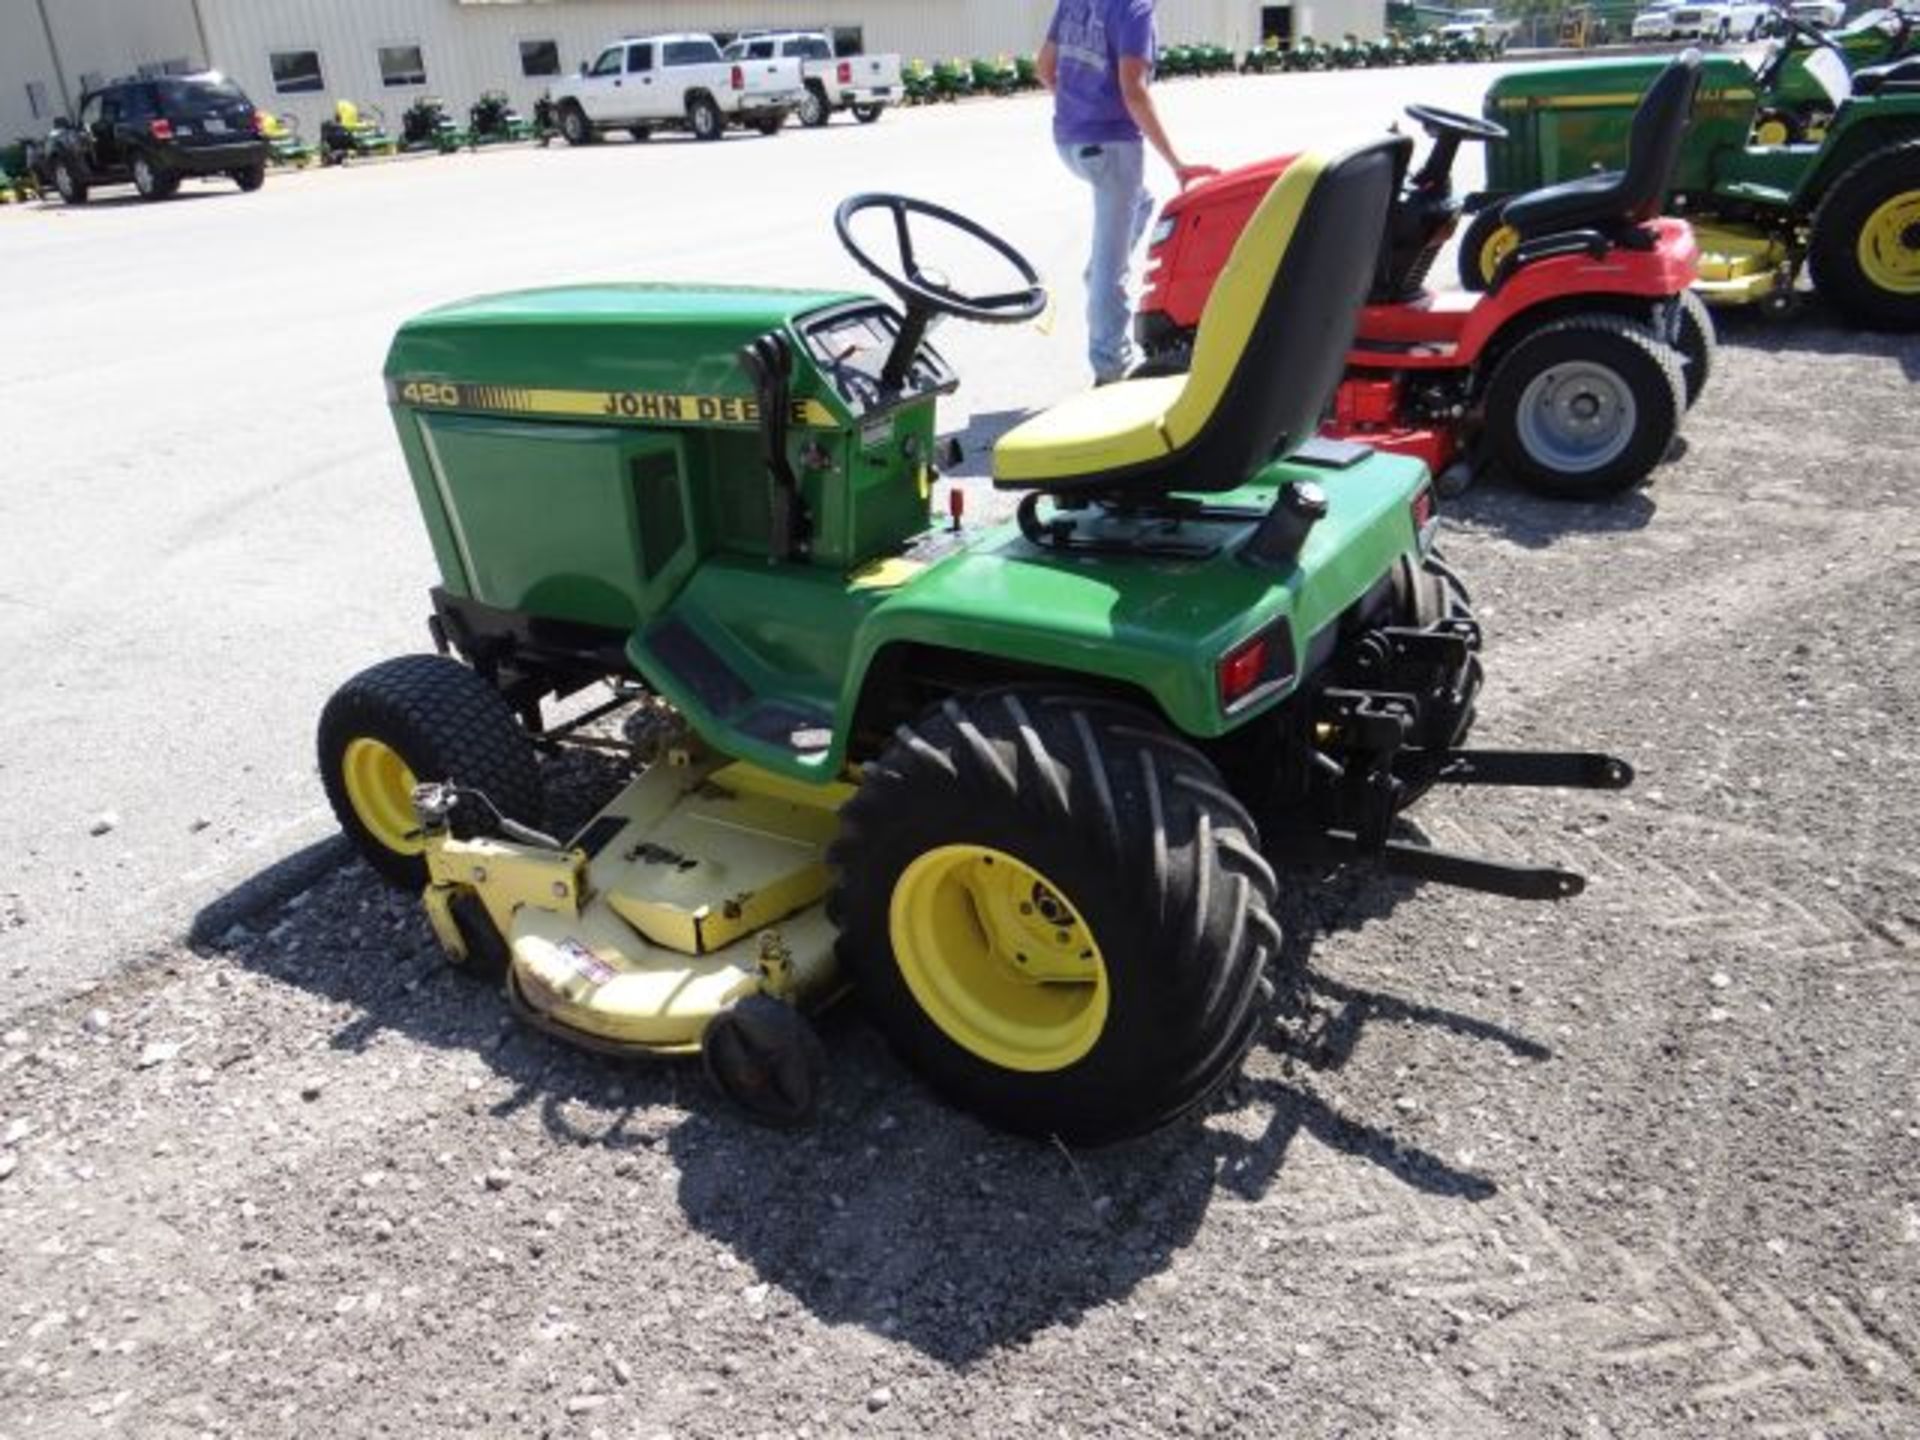 1992 JD 420/60 Mower 1552 hrs, 20hp, Onan, Air Cooled, 2sp Hydro, Hand Control, PS, Diff Lock, Hyd - Image 3 of 4